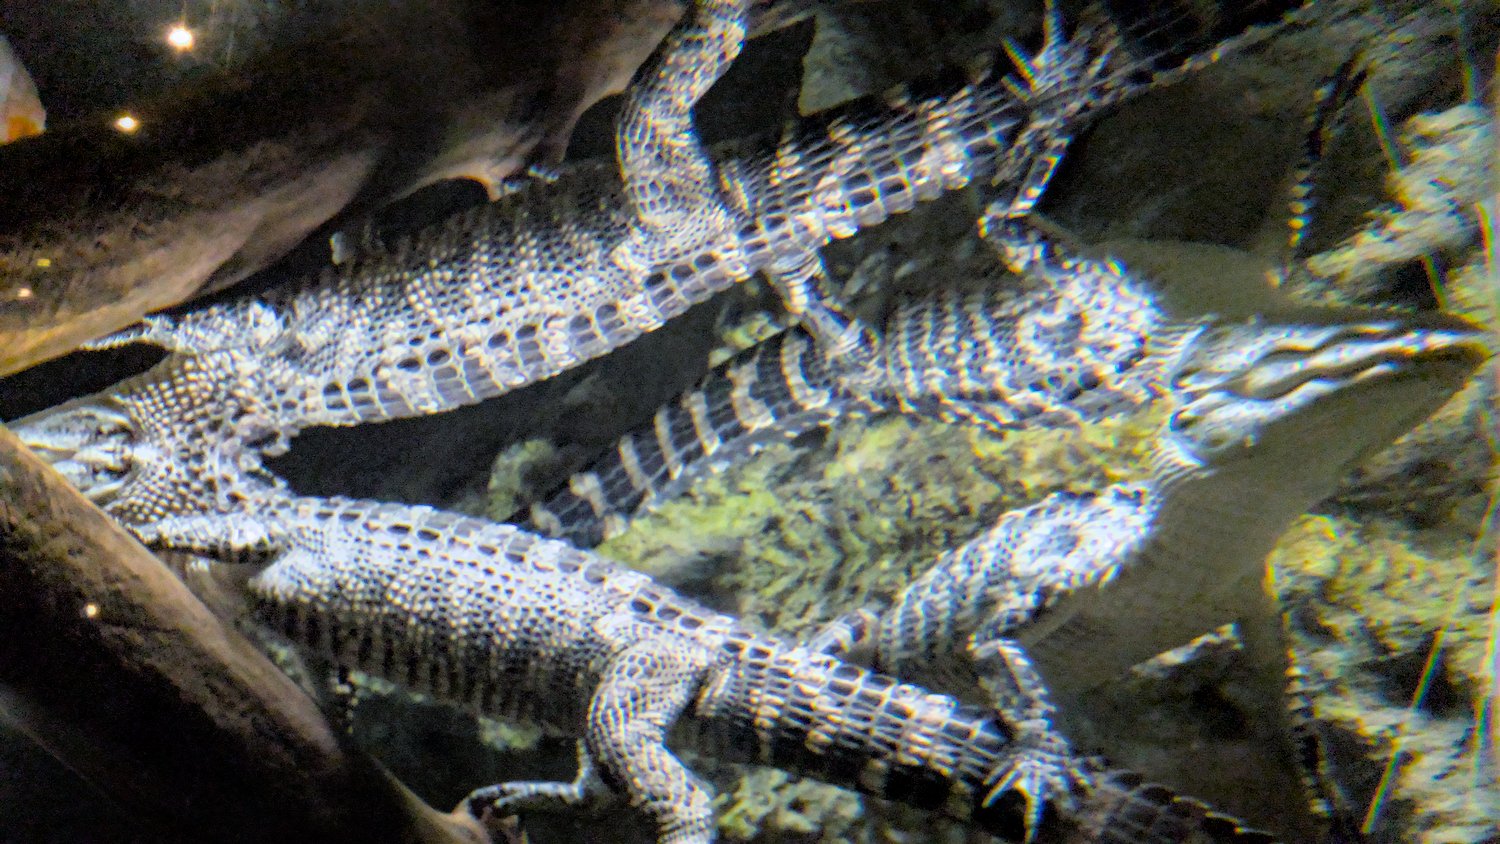 Alligators reflected on the surface.